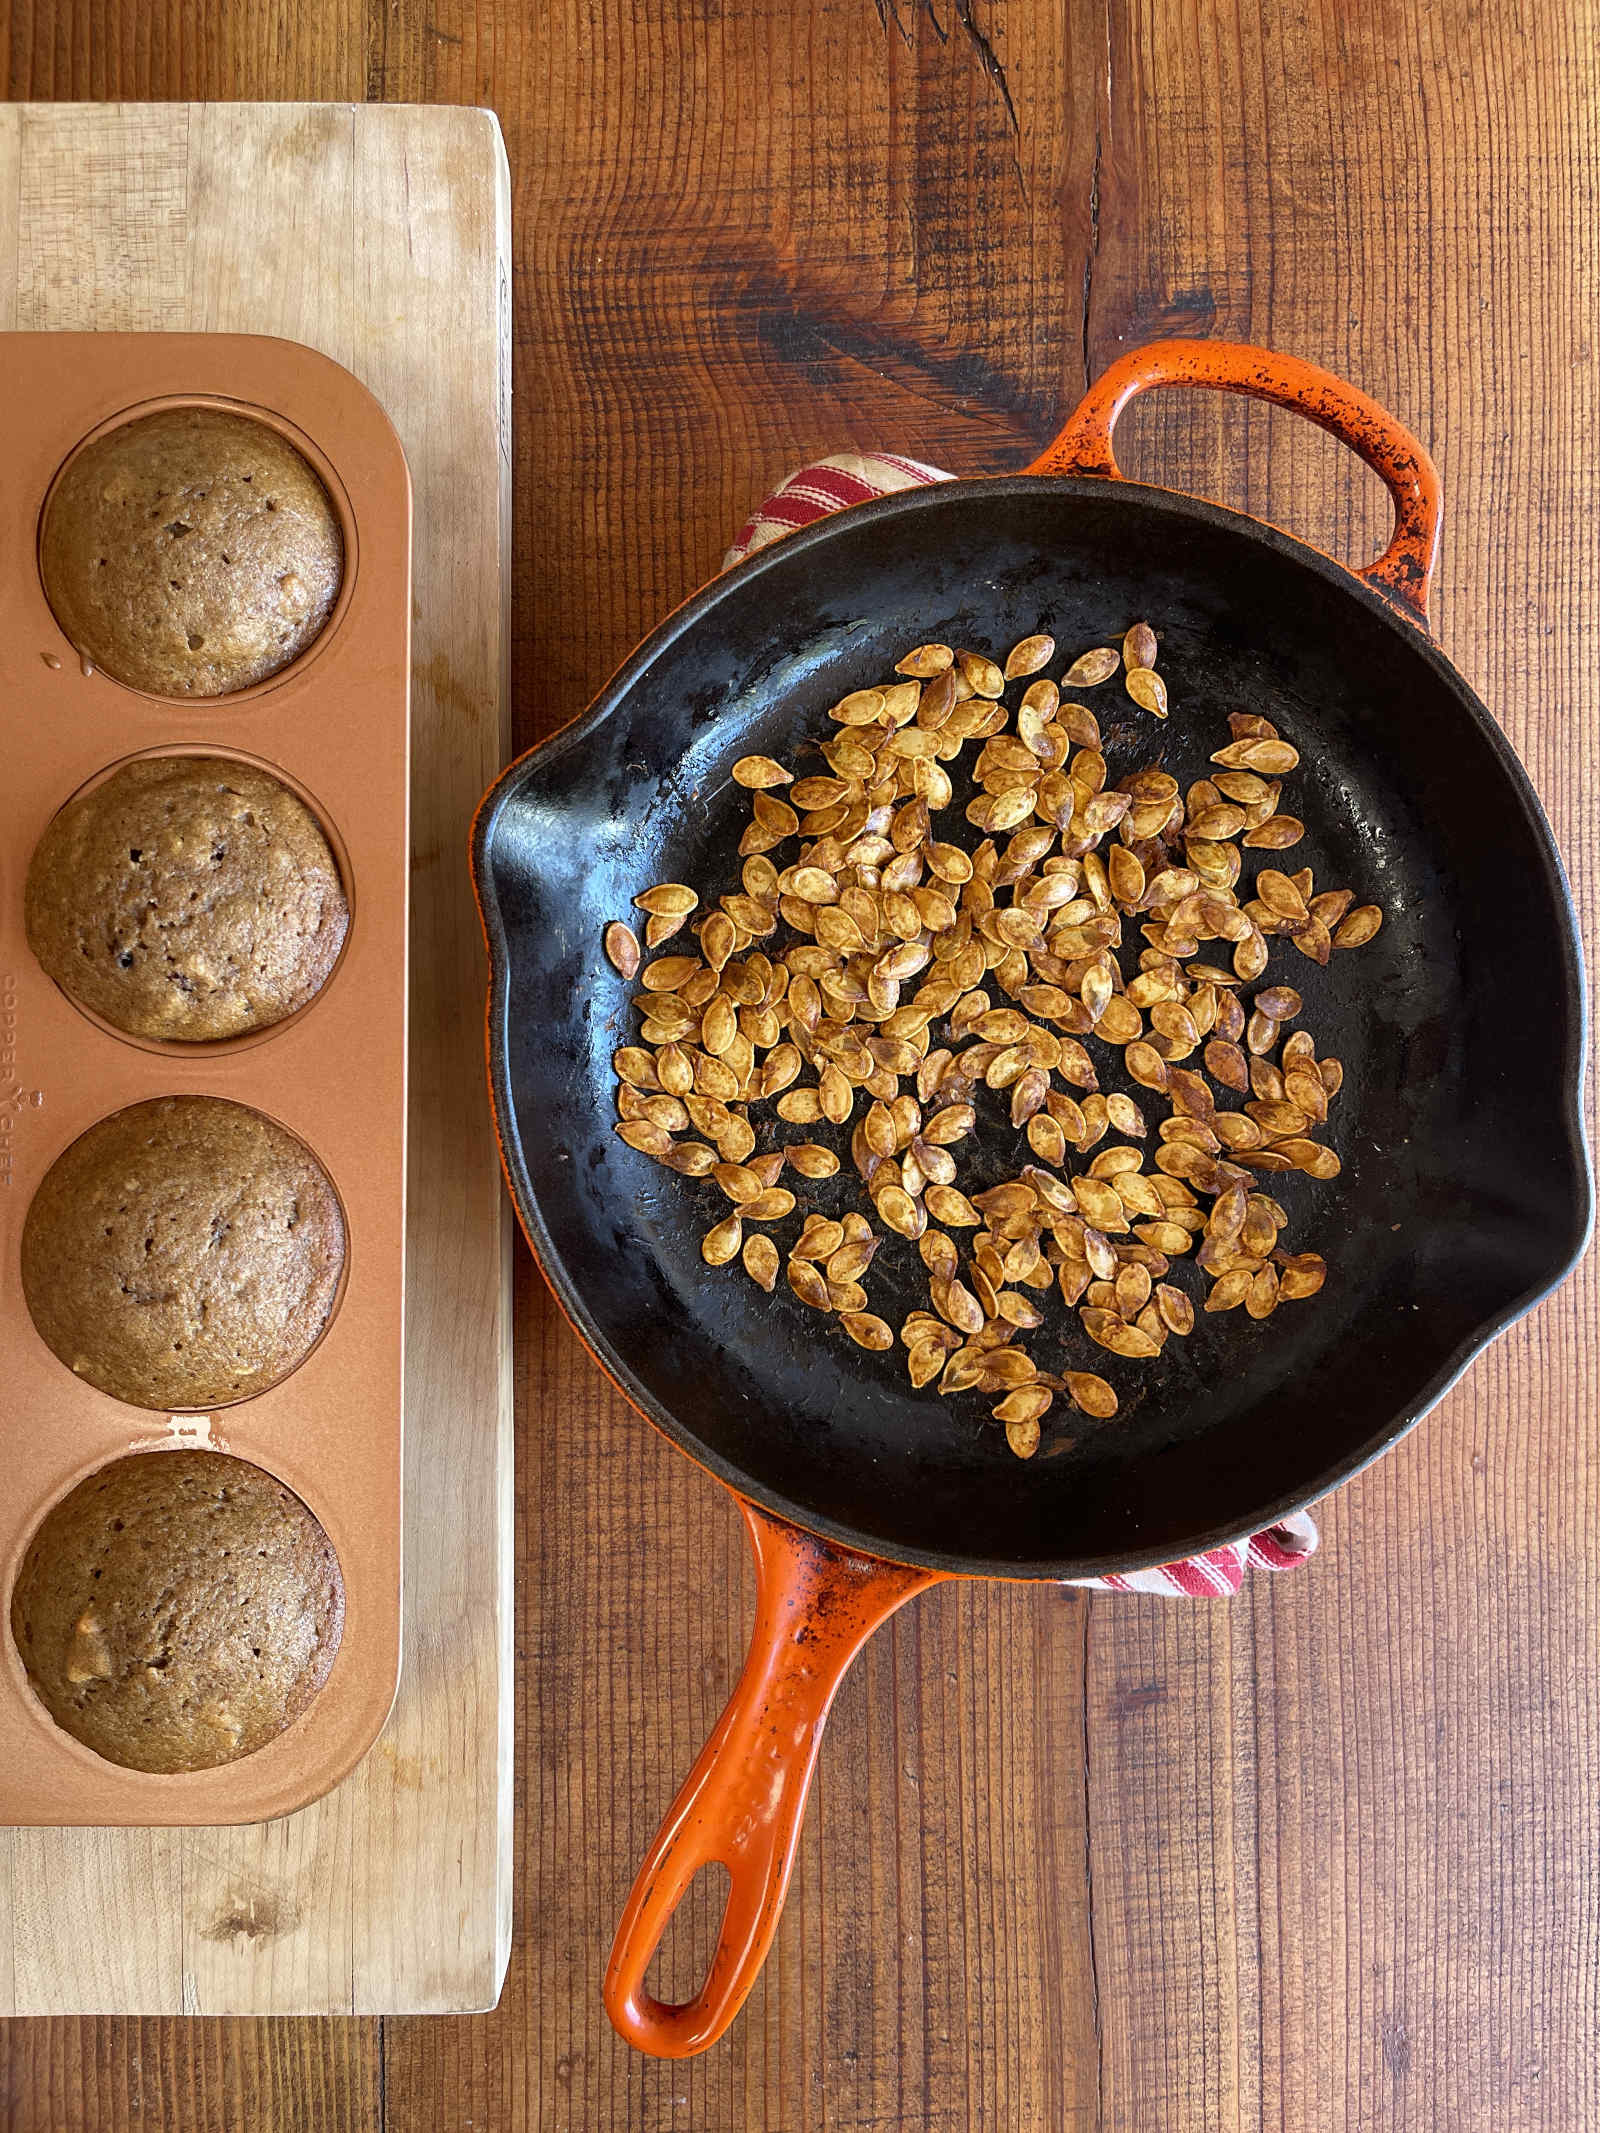 A cast iron pan filled with roasted pumpkin seeds sits on the right of a partially shown muffin pan filled with pumpkin spice muffins